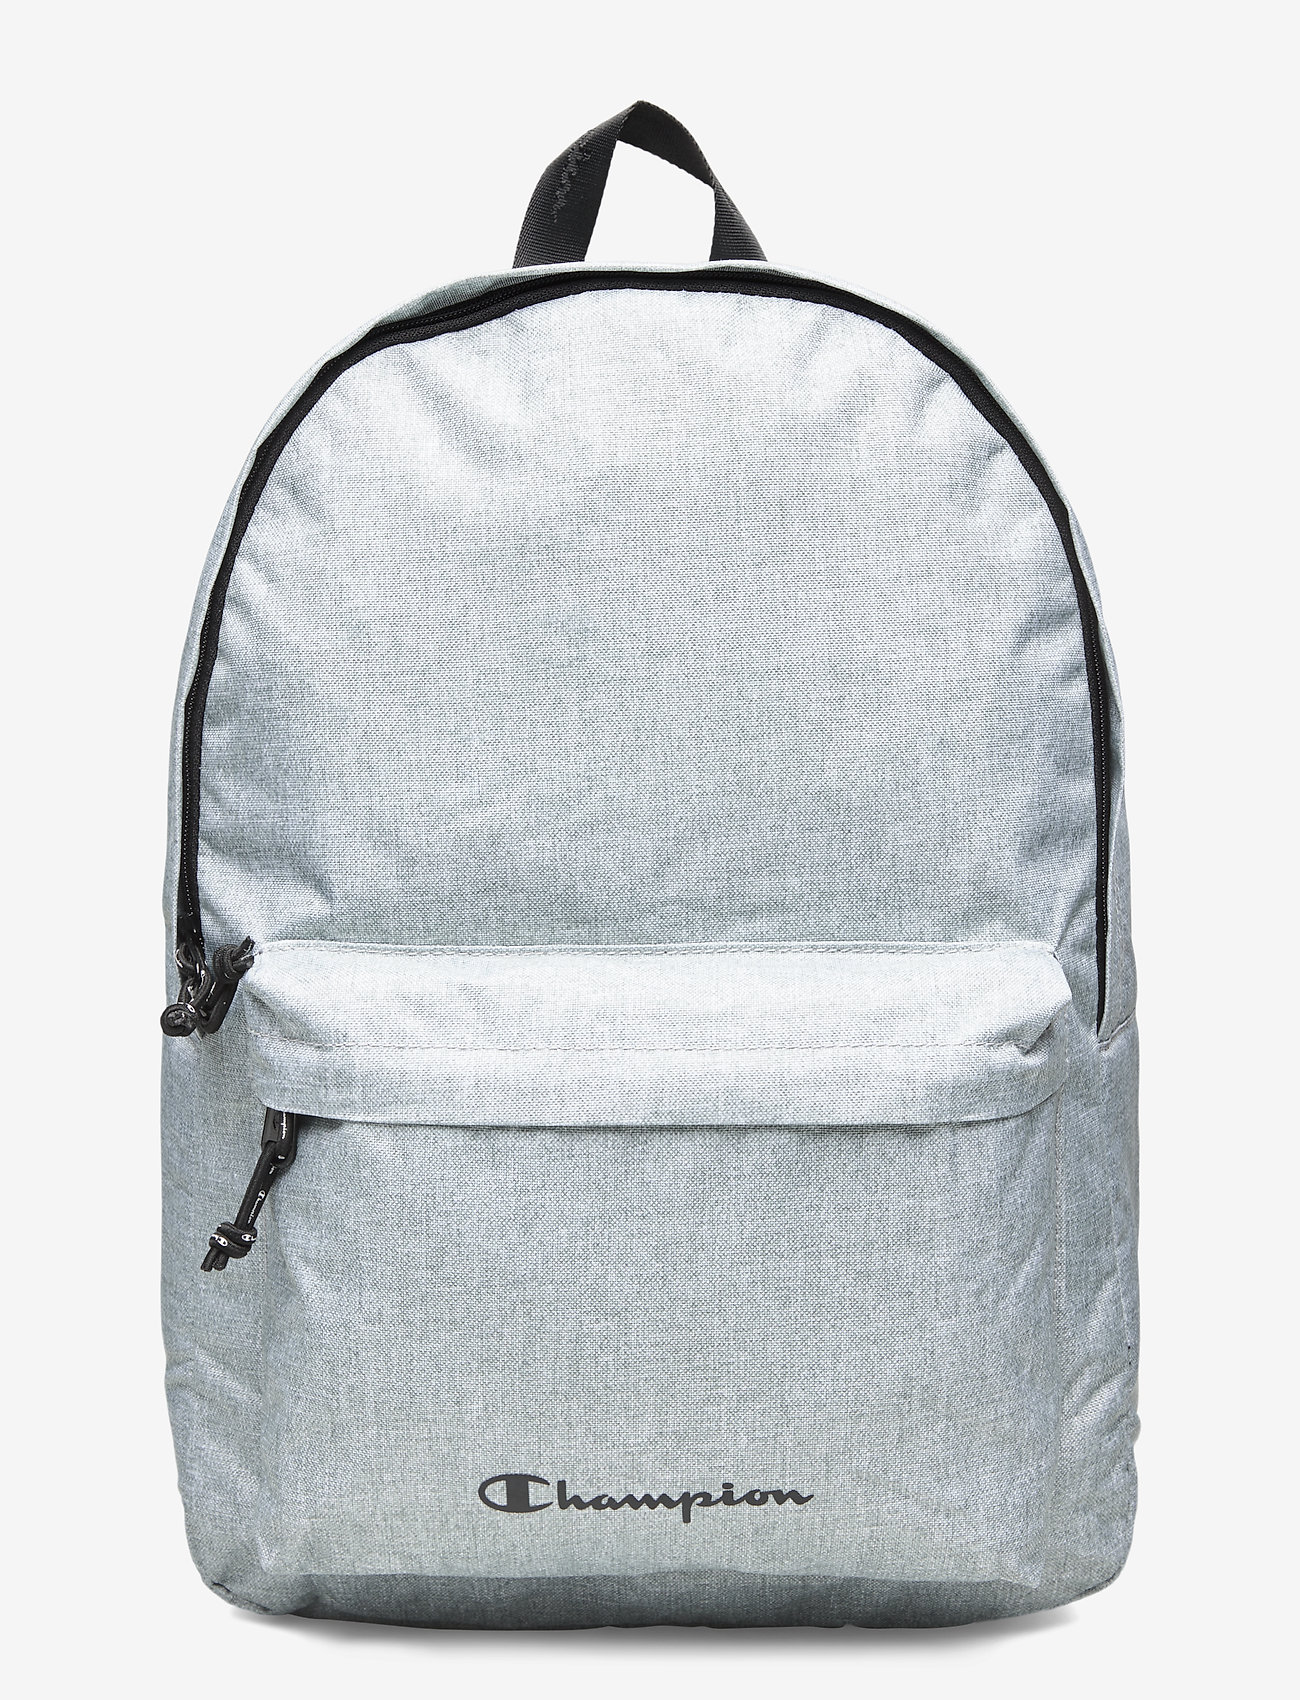 champion backpack grey